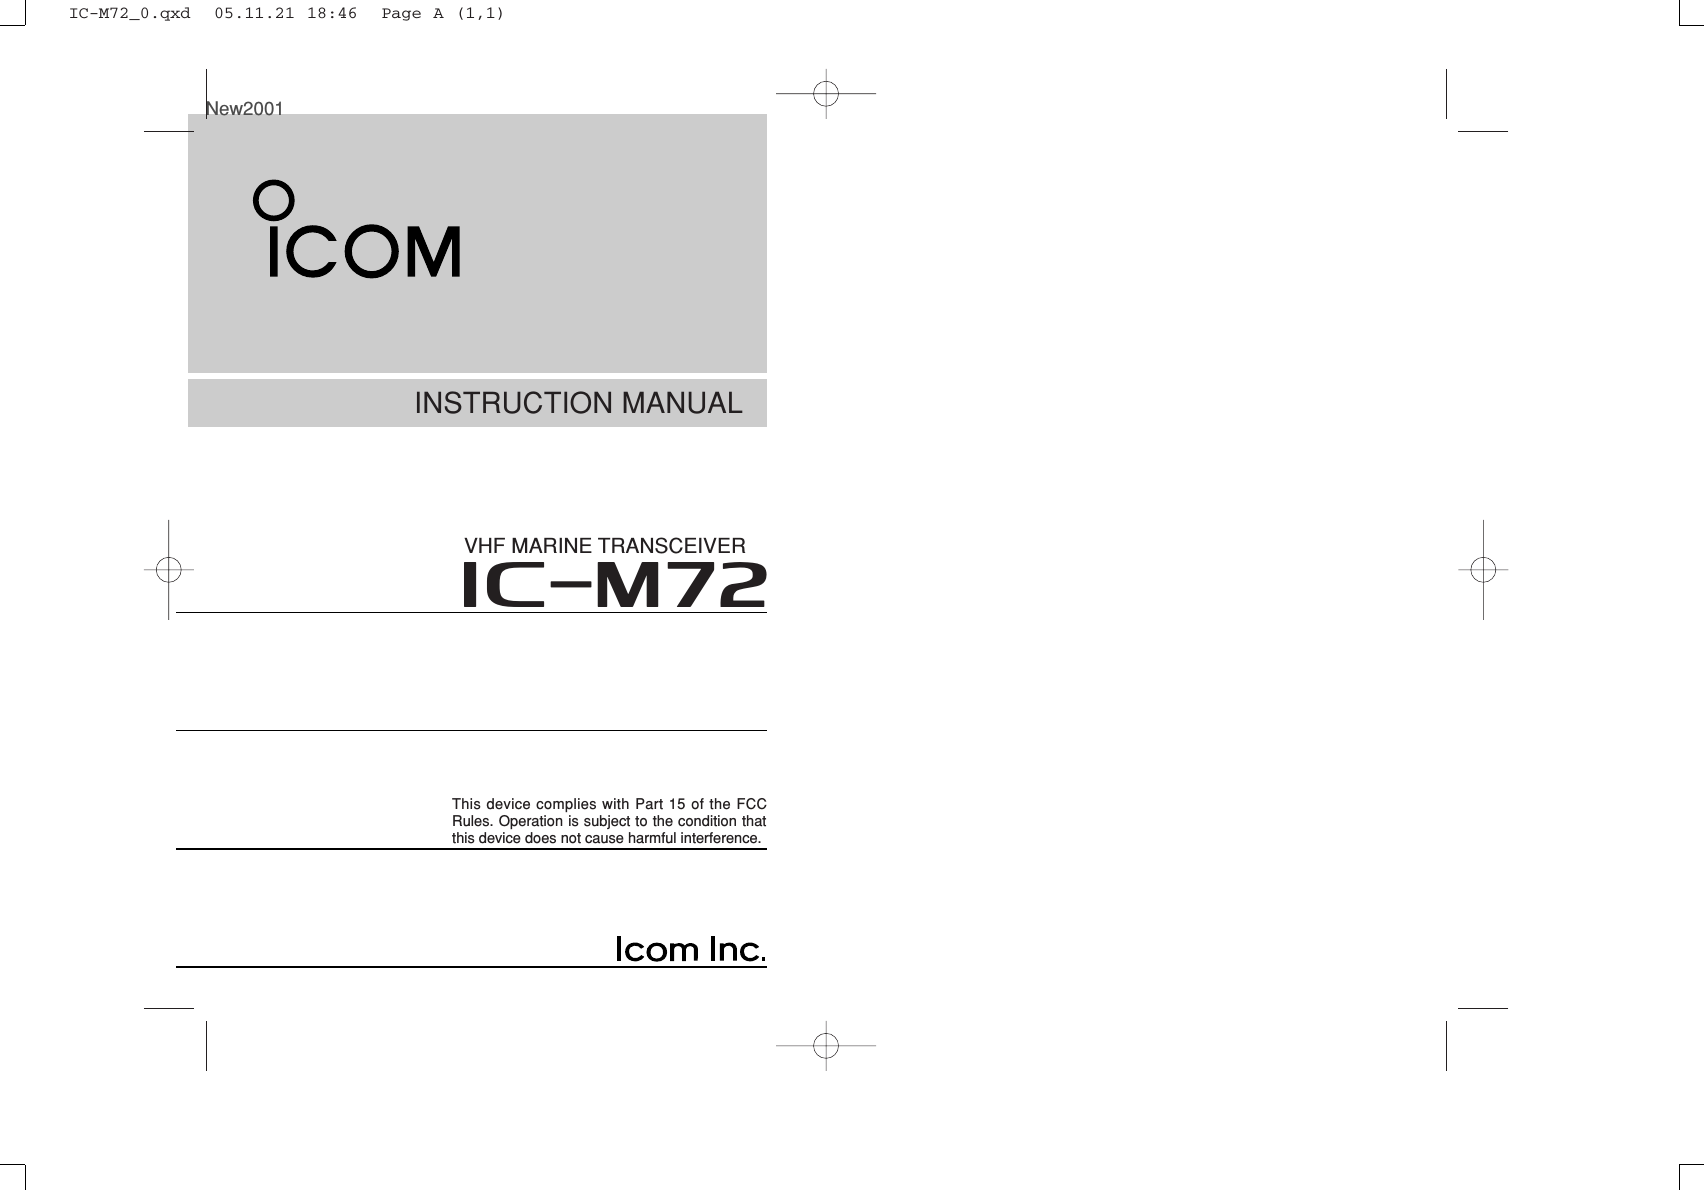 INSTRUCTION MANUALiM72VHF MARINE TRANSCEIVERThis device complies with Part 15 of the FCCRules. Operation is subject to the condition thatthis device does not cause harmful interference.New2001IC-M72_0.qxd  05.11.21 18:46  Page A (1,1)